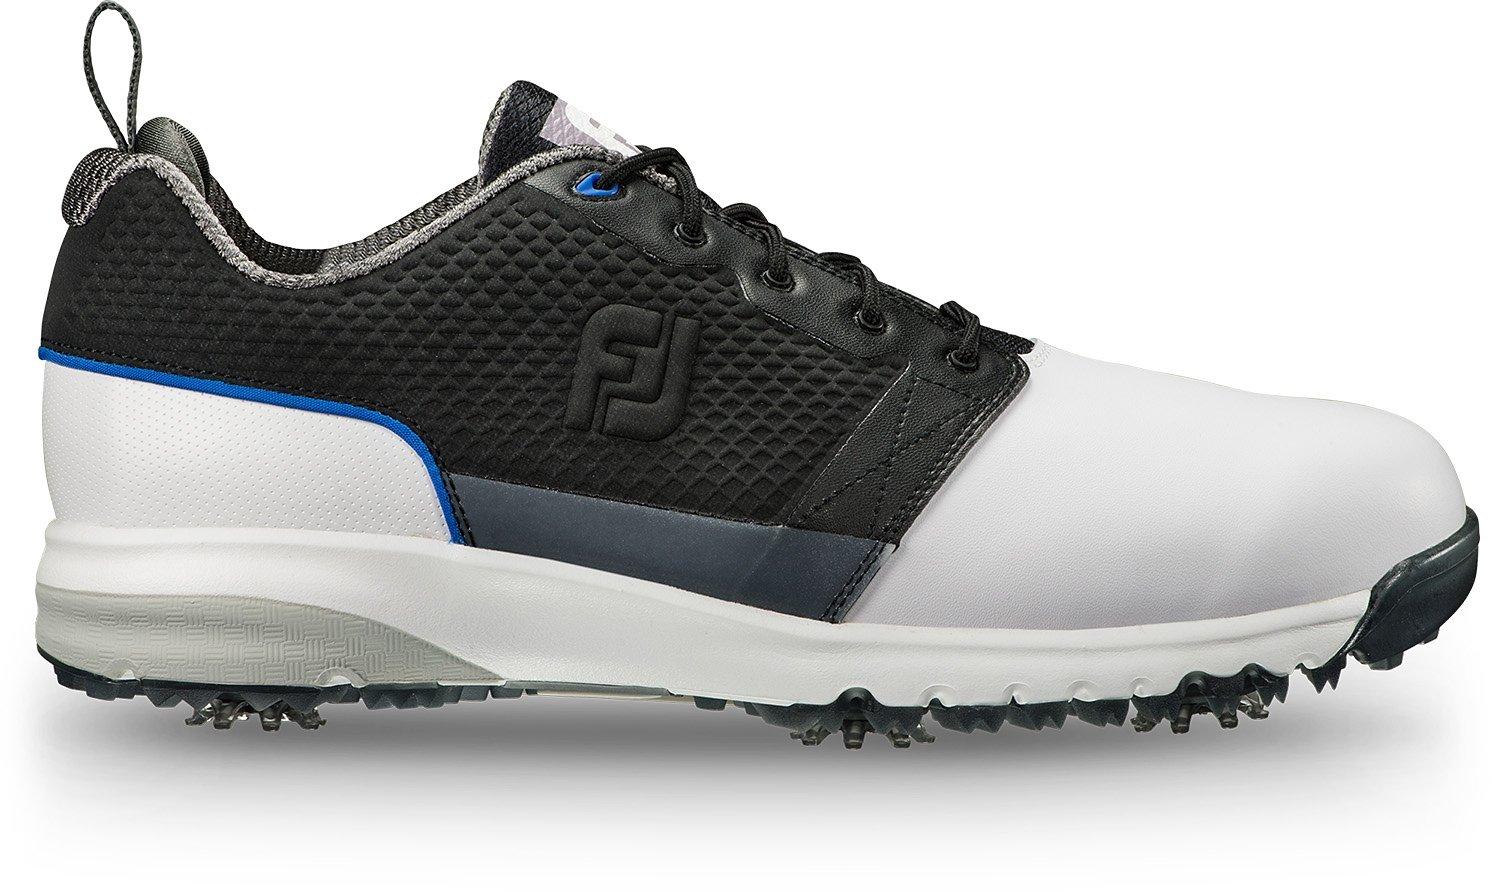 Men's ContourFIT Spiked Golf Shoe - White/Black @ Golf Town Limited